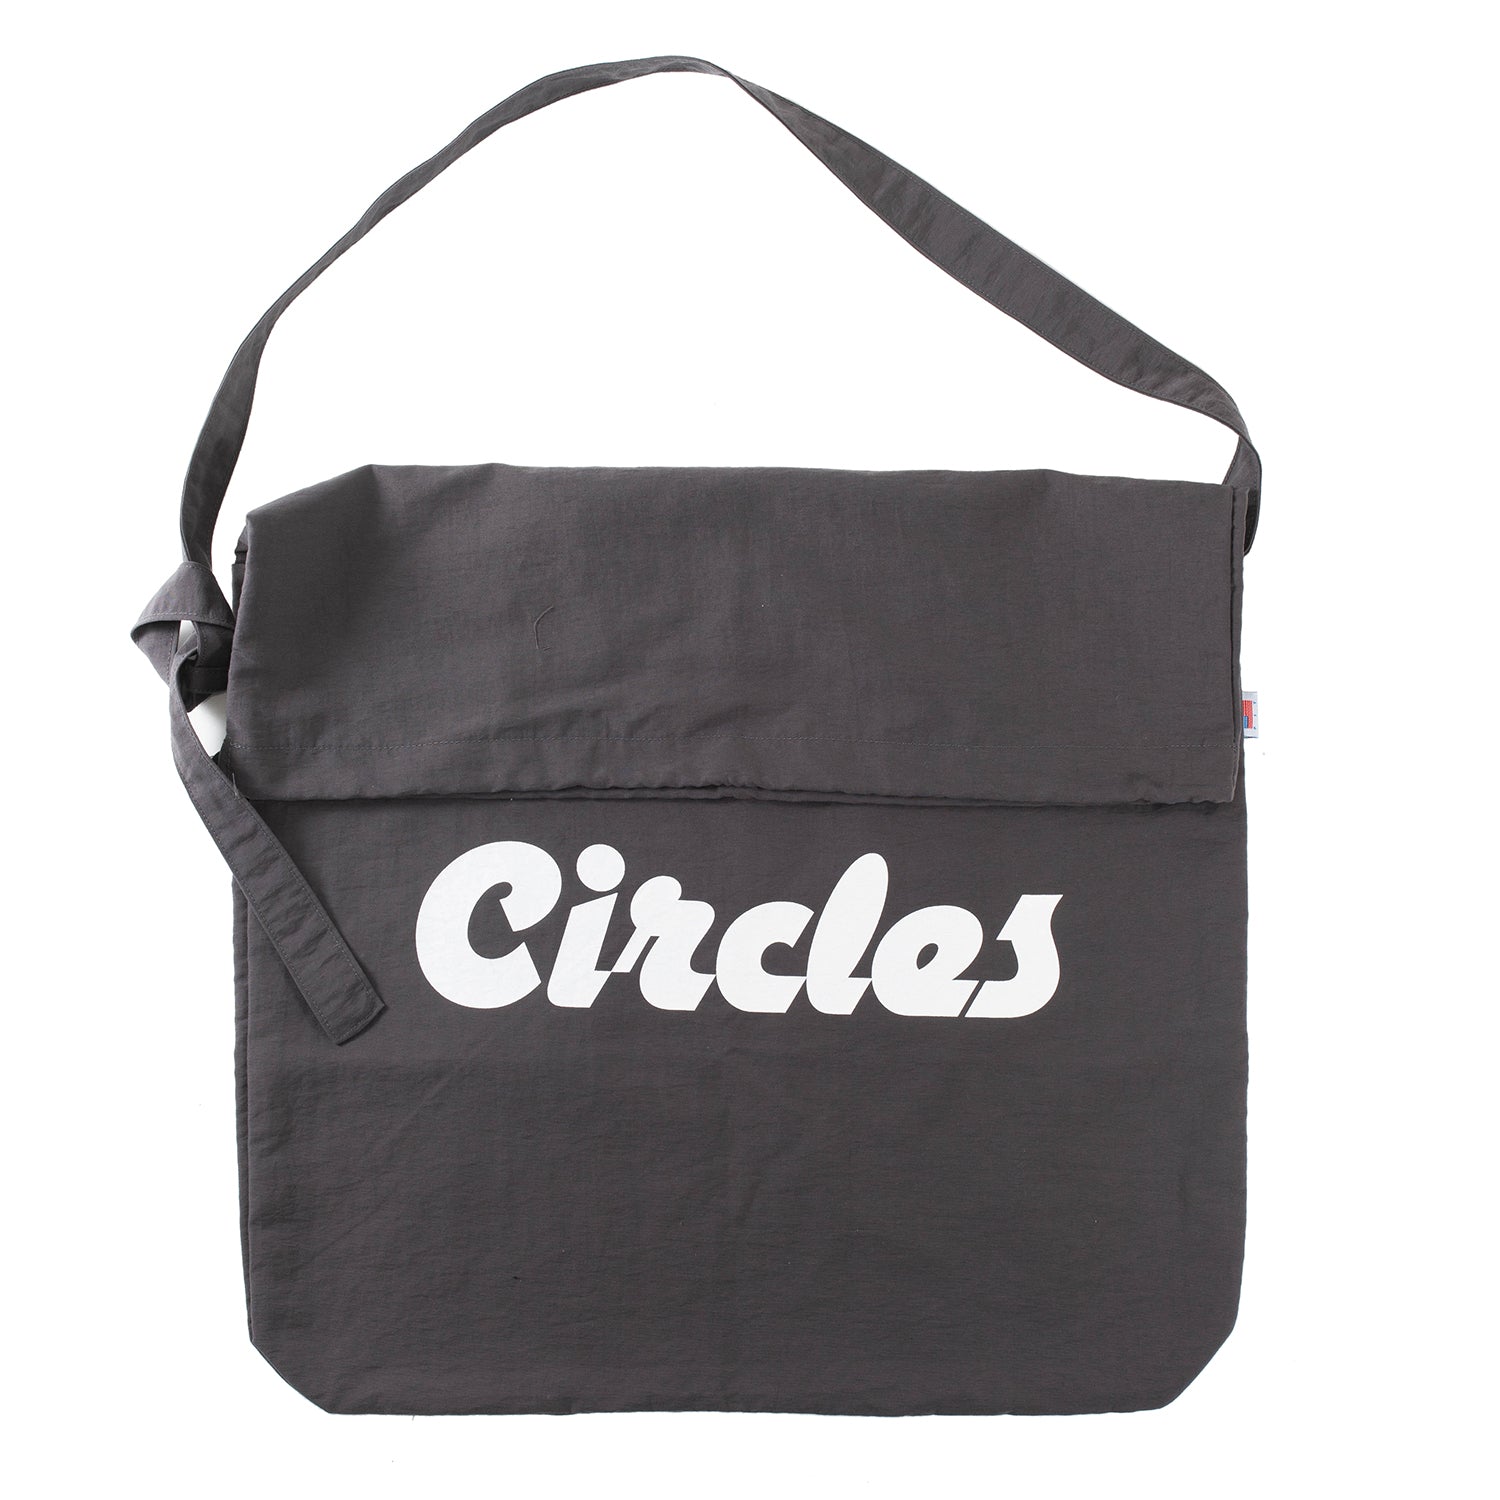 RELAX FIT EasyBag made For Circles